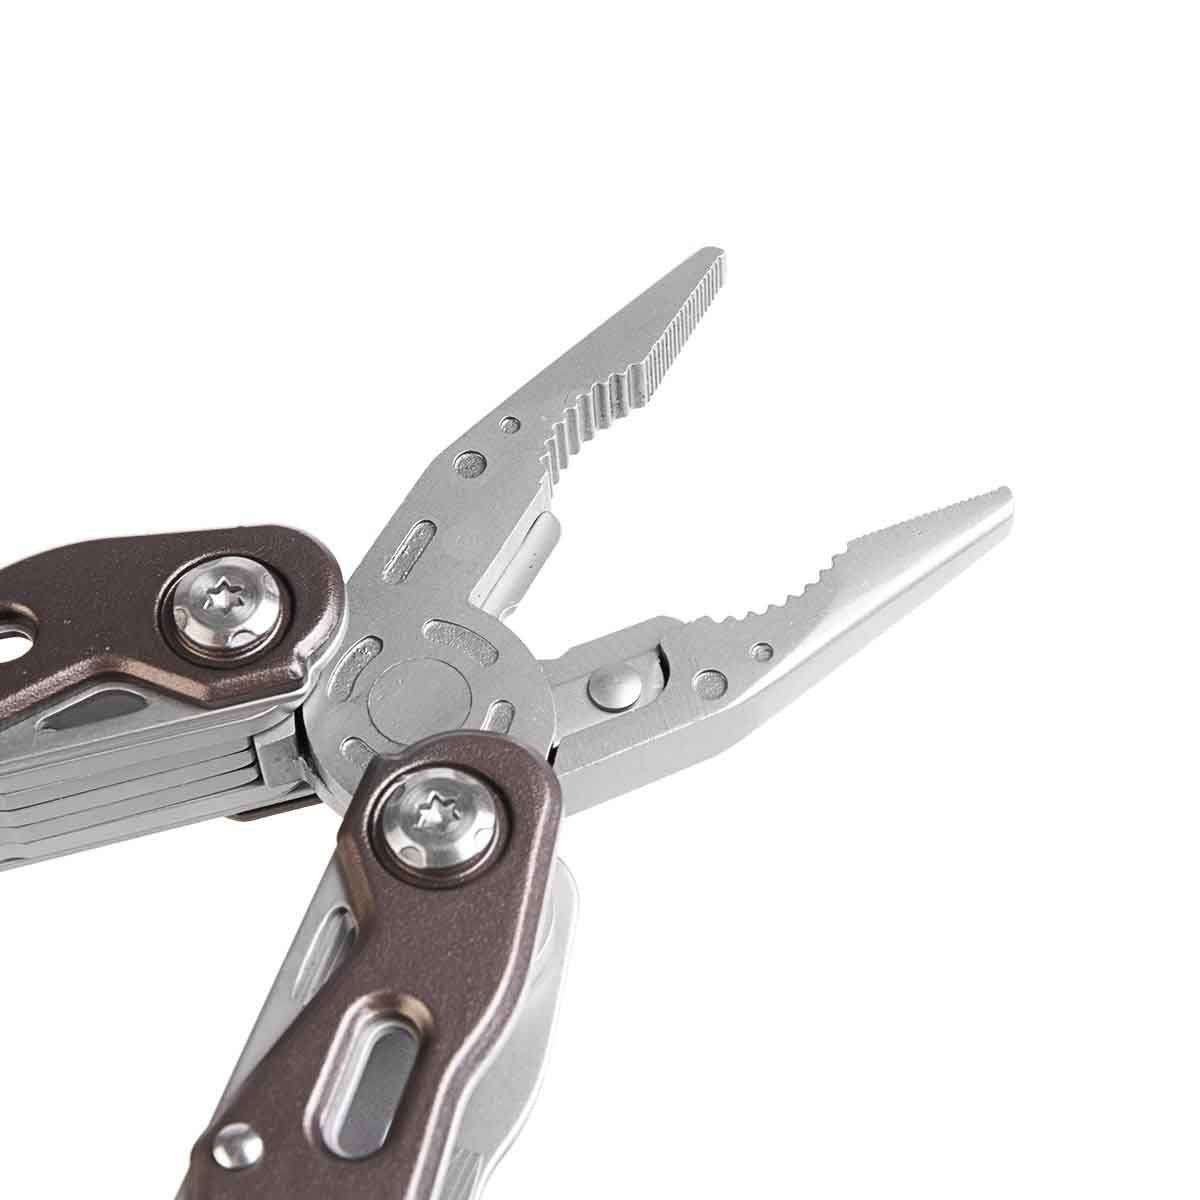 Compact 7-in-1 Pliers Multitool for Home and Outdoor